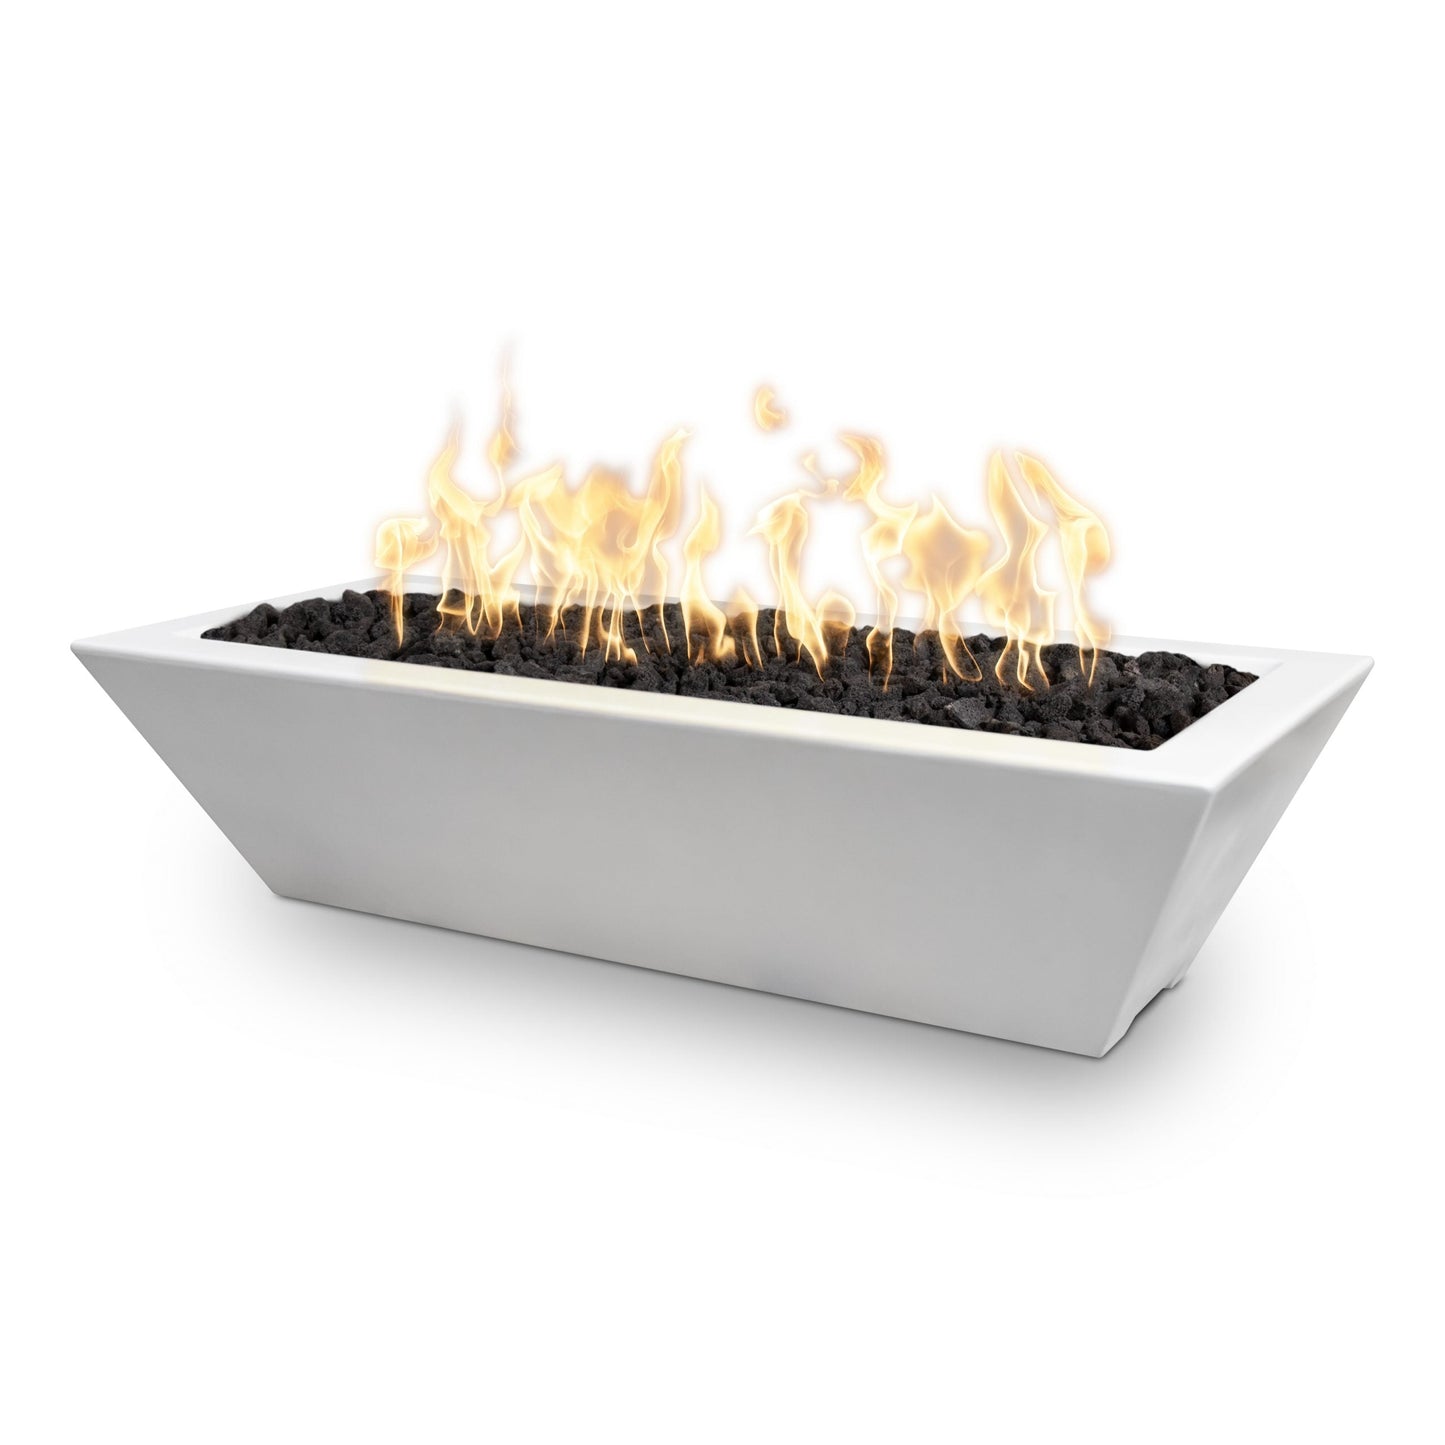 The Outdoor Plus Linear Maya 72" Metallic Copper GFRC Concrete Liquid Propane Fire Bowl with 12V Electronic Ignition